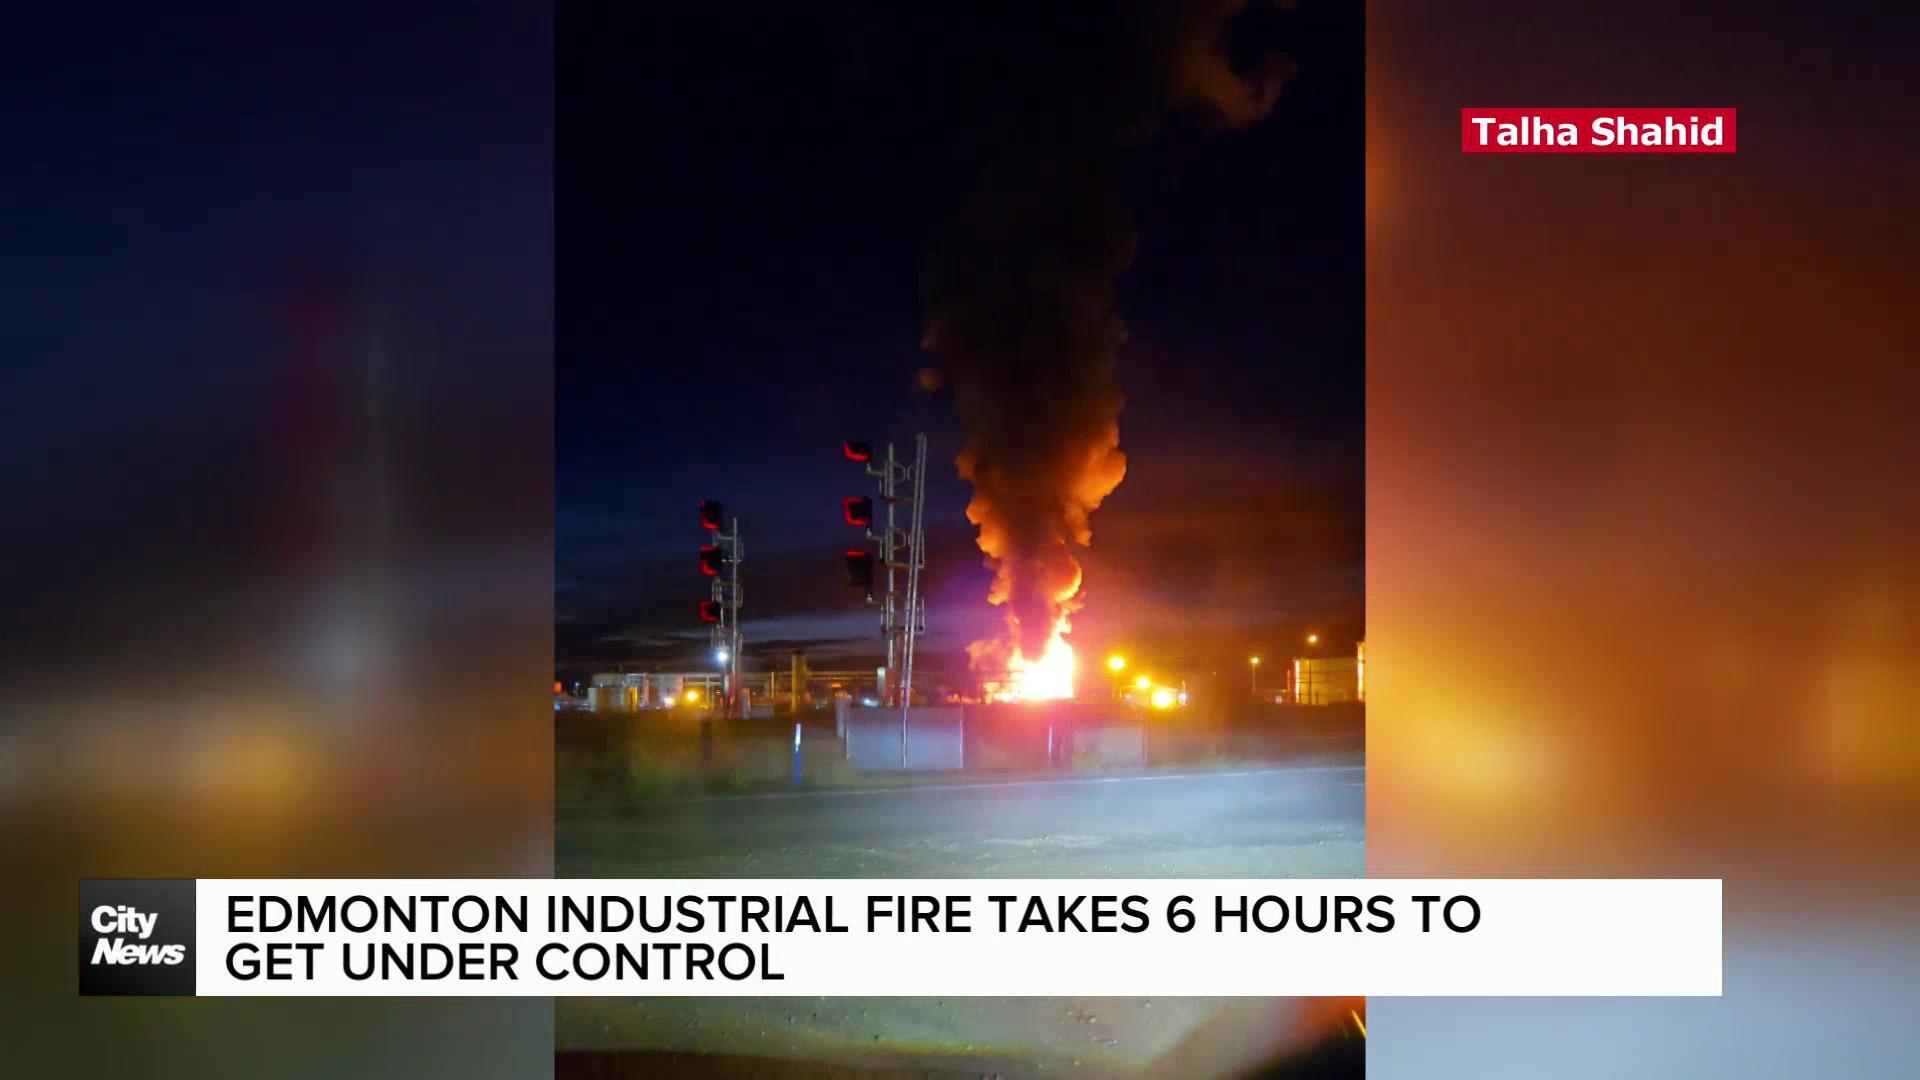 Edmonton industrial fire takes 6 hours to get under control